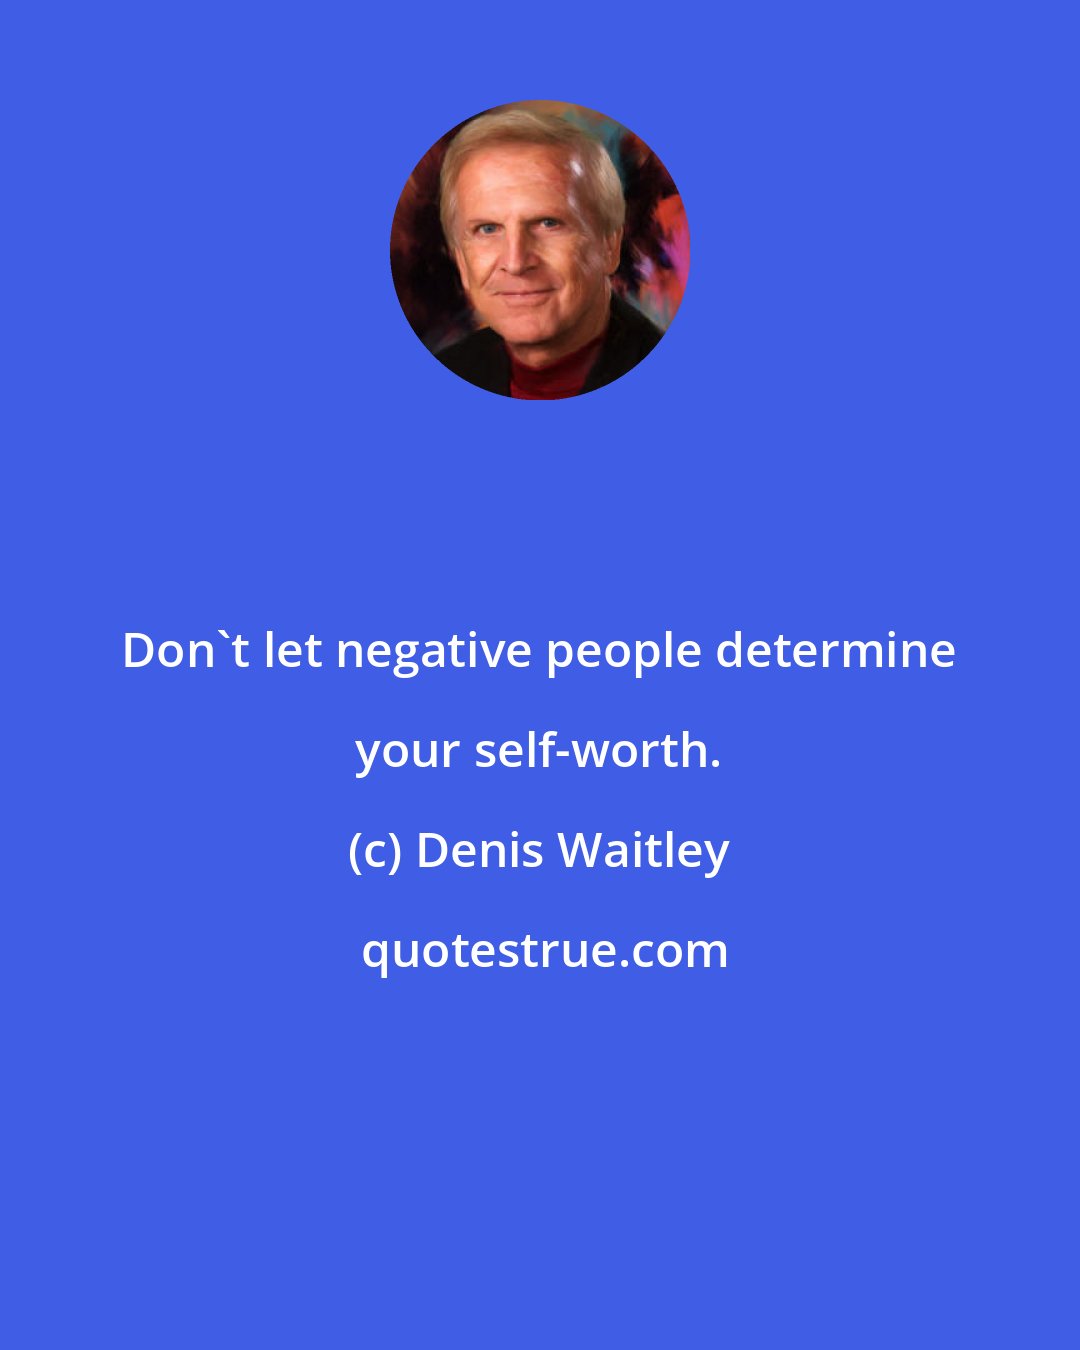 Denis Waitley: Don't let negative people determine your self-worth.